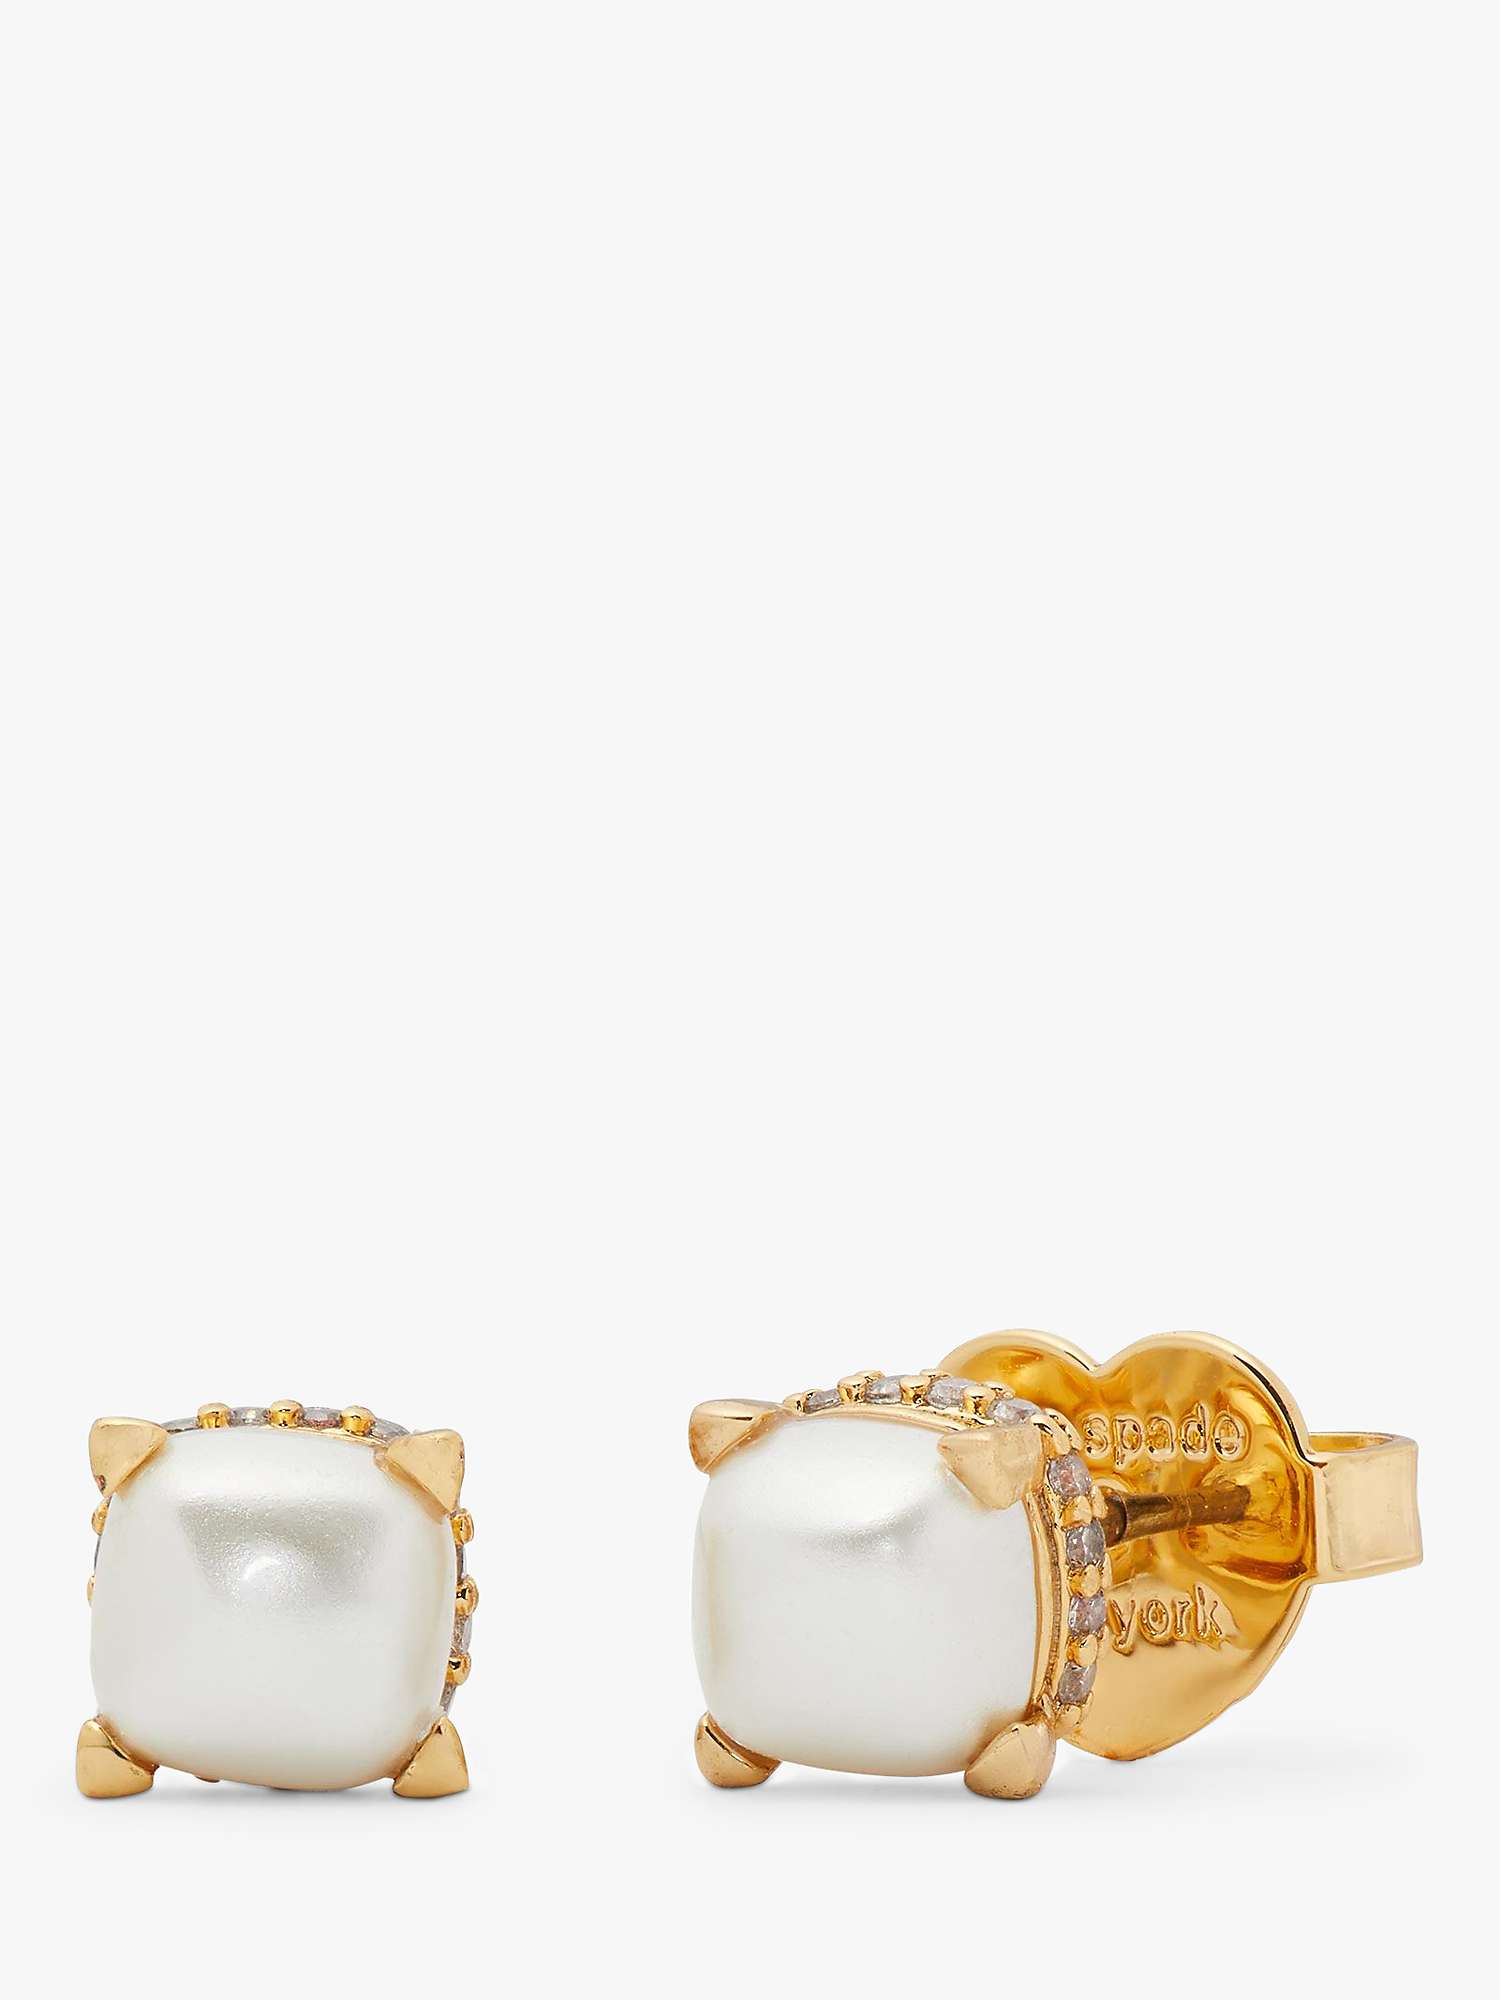 Buy kate spade new york Little Luxuries Glass Pearl Square Stud Earrings, Gold/Cream Online at johnlewis.com